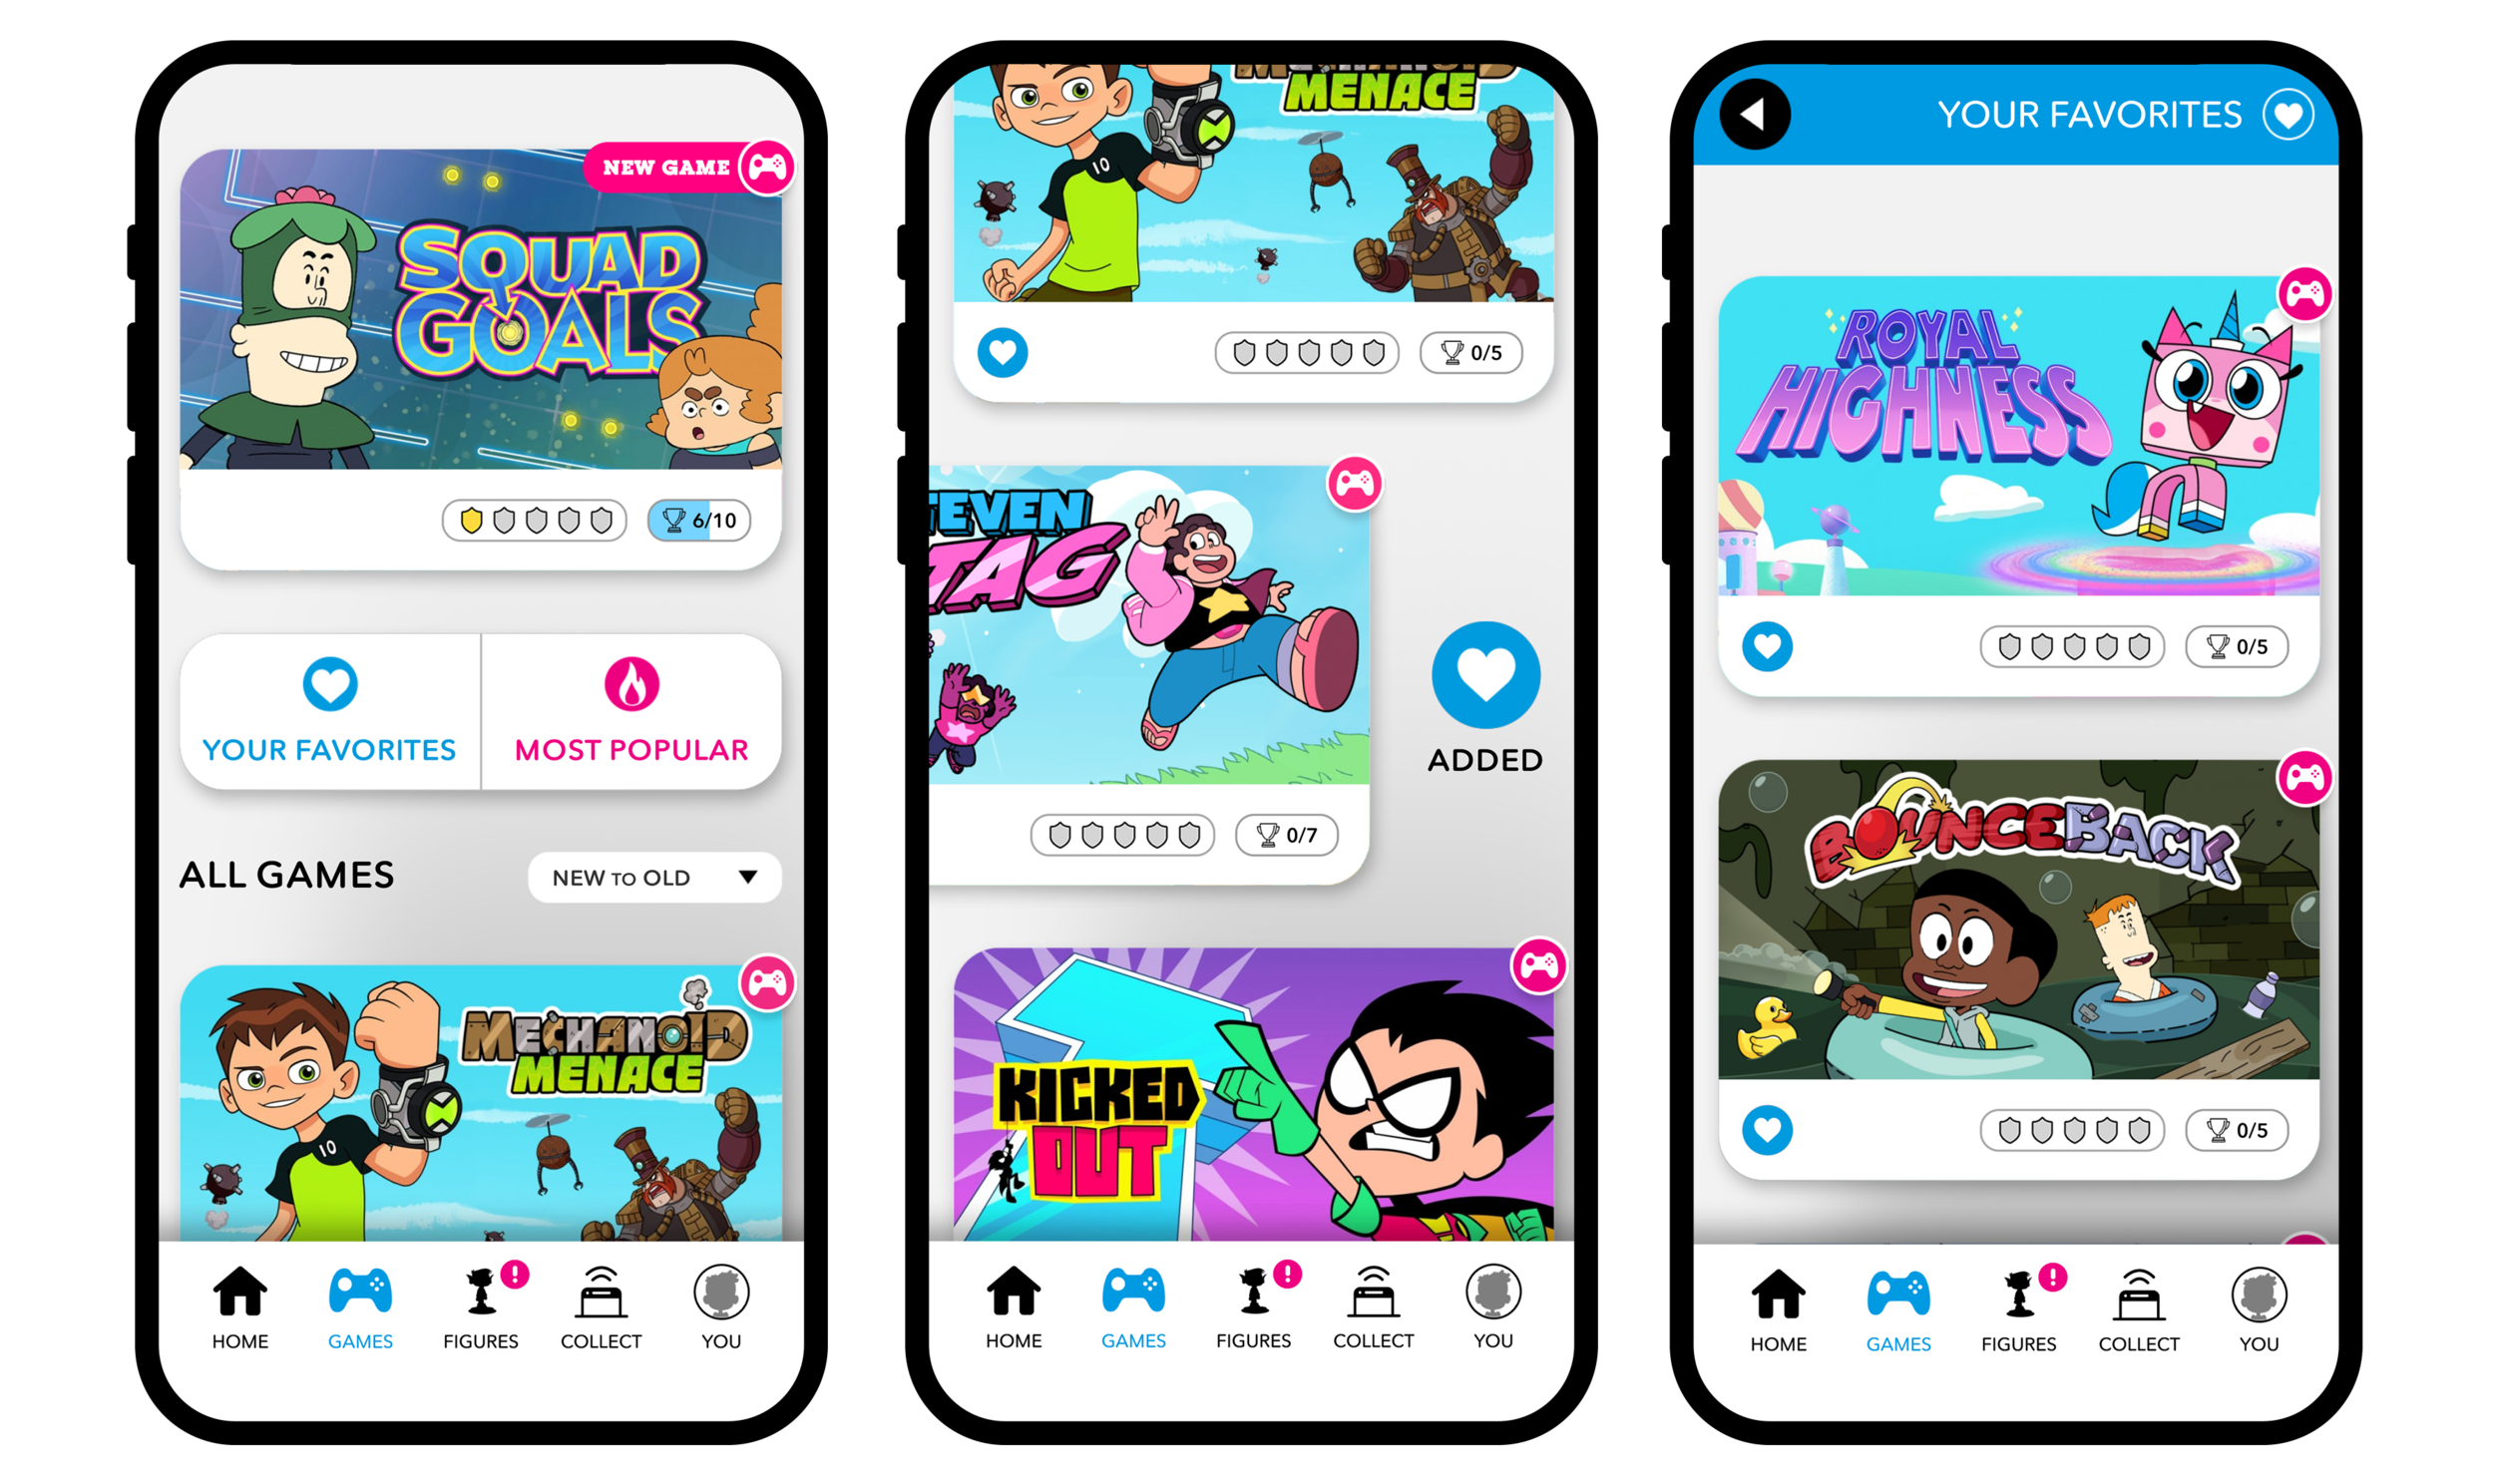 Cartoon Network launching two free gaming apps